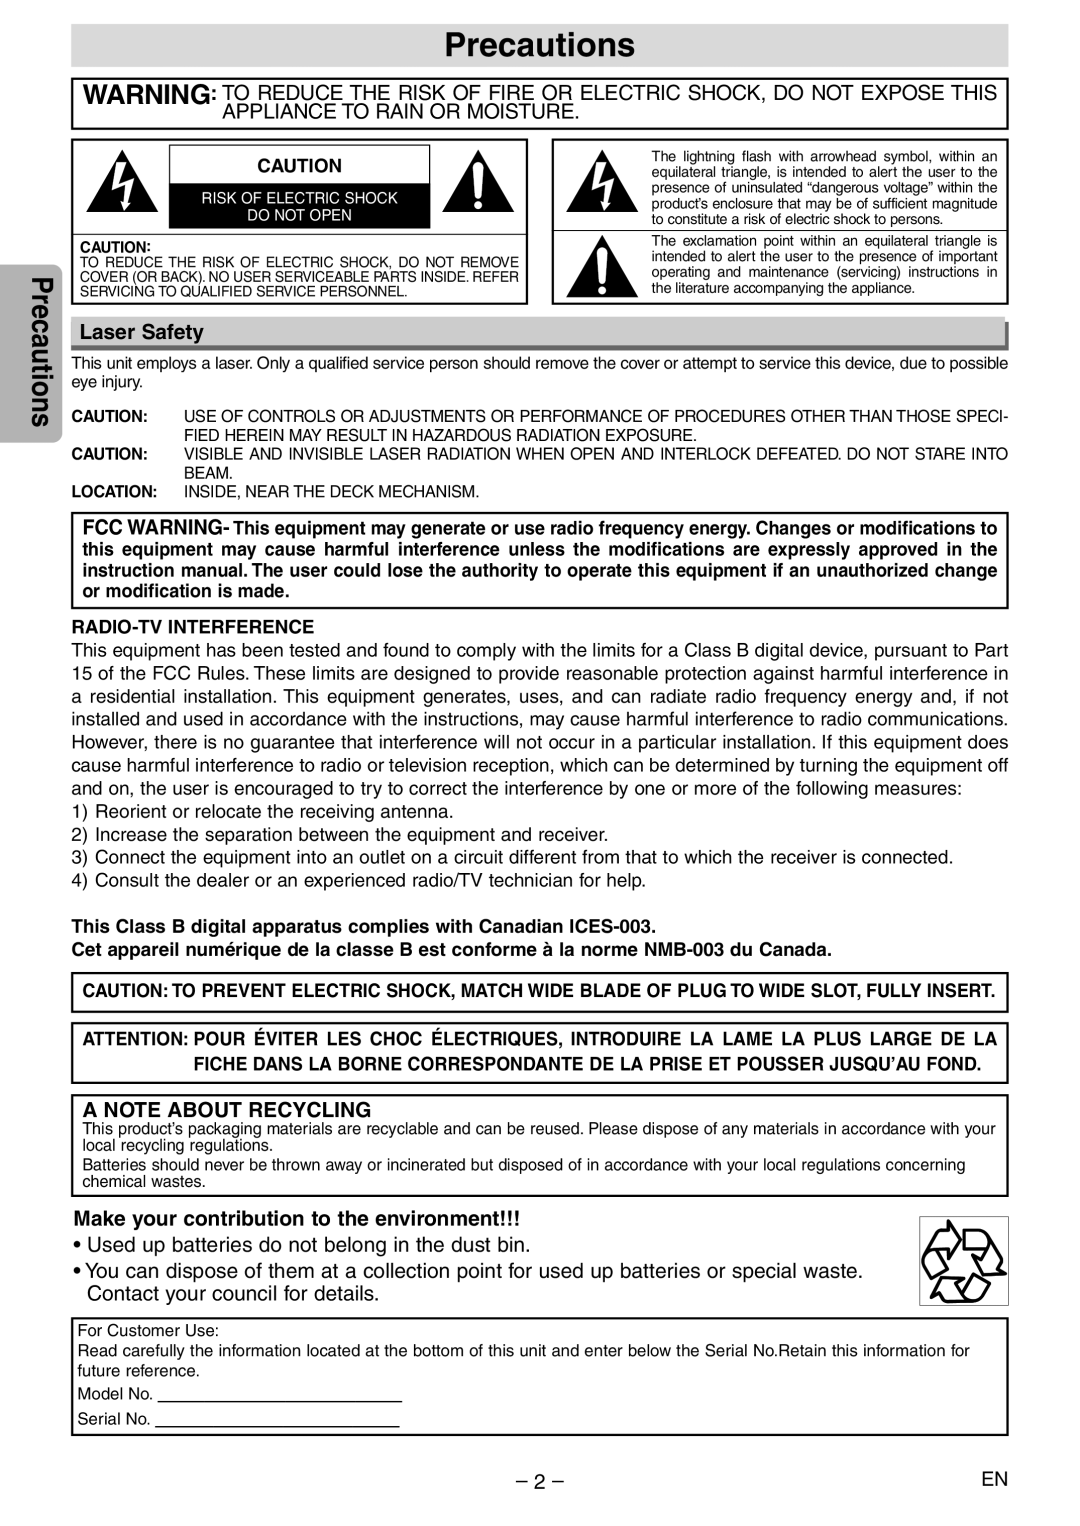 Sylvania DVL100E owner manual Precautions, Laser Safety, A Note About Recycling, Make your contribution to the environment 